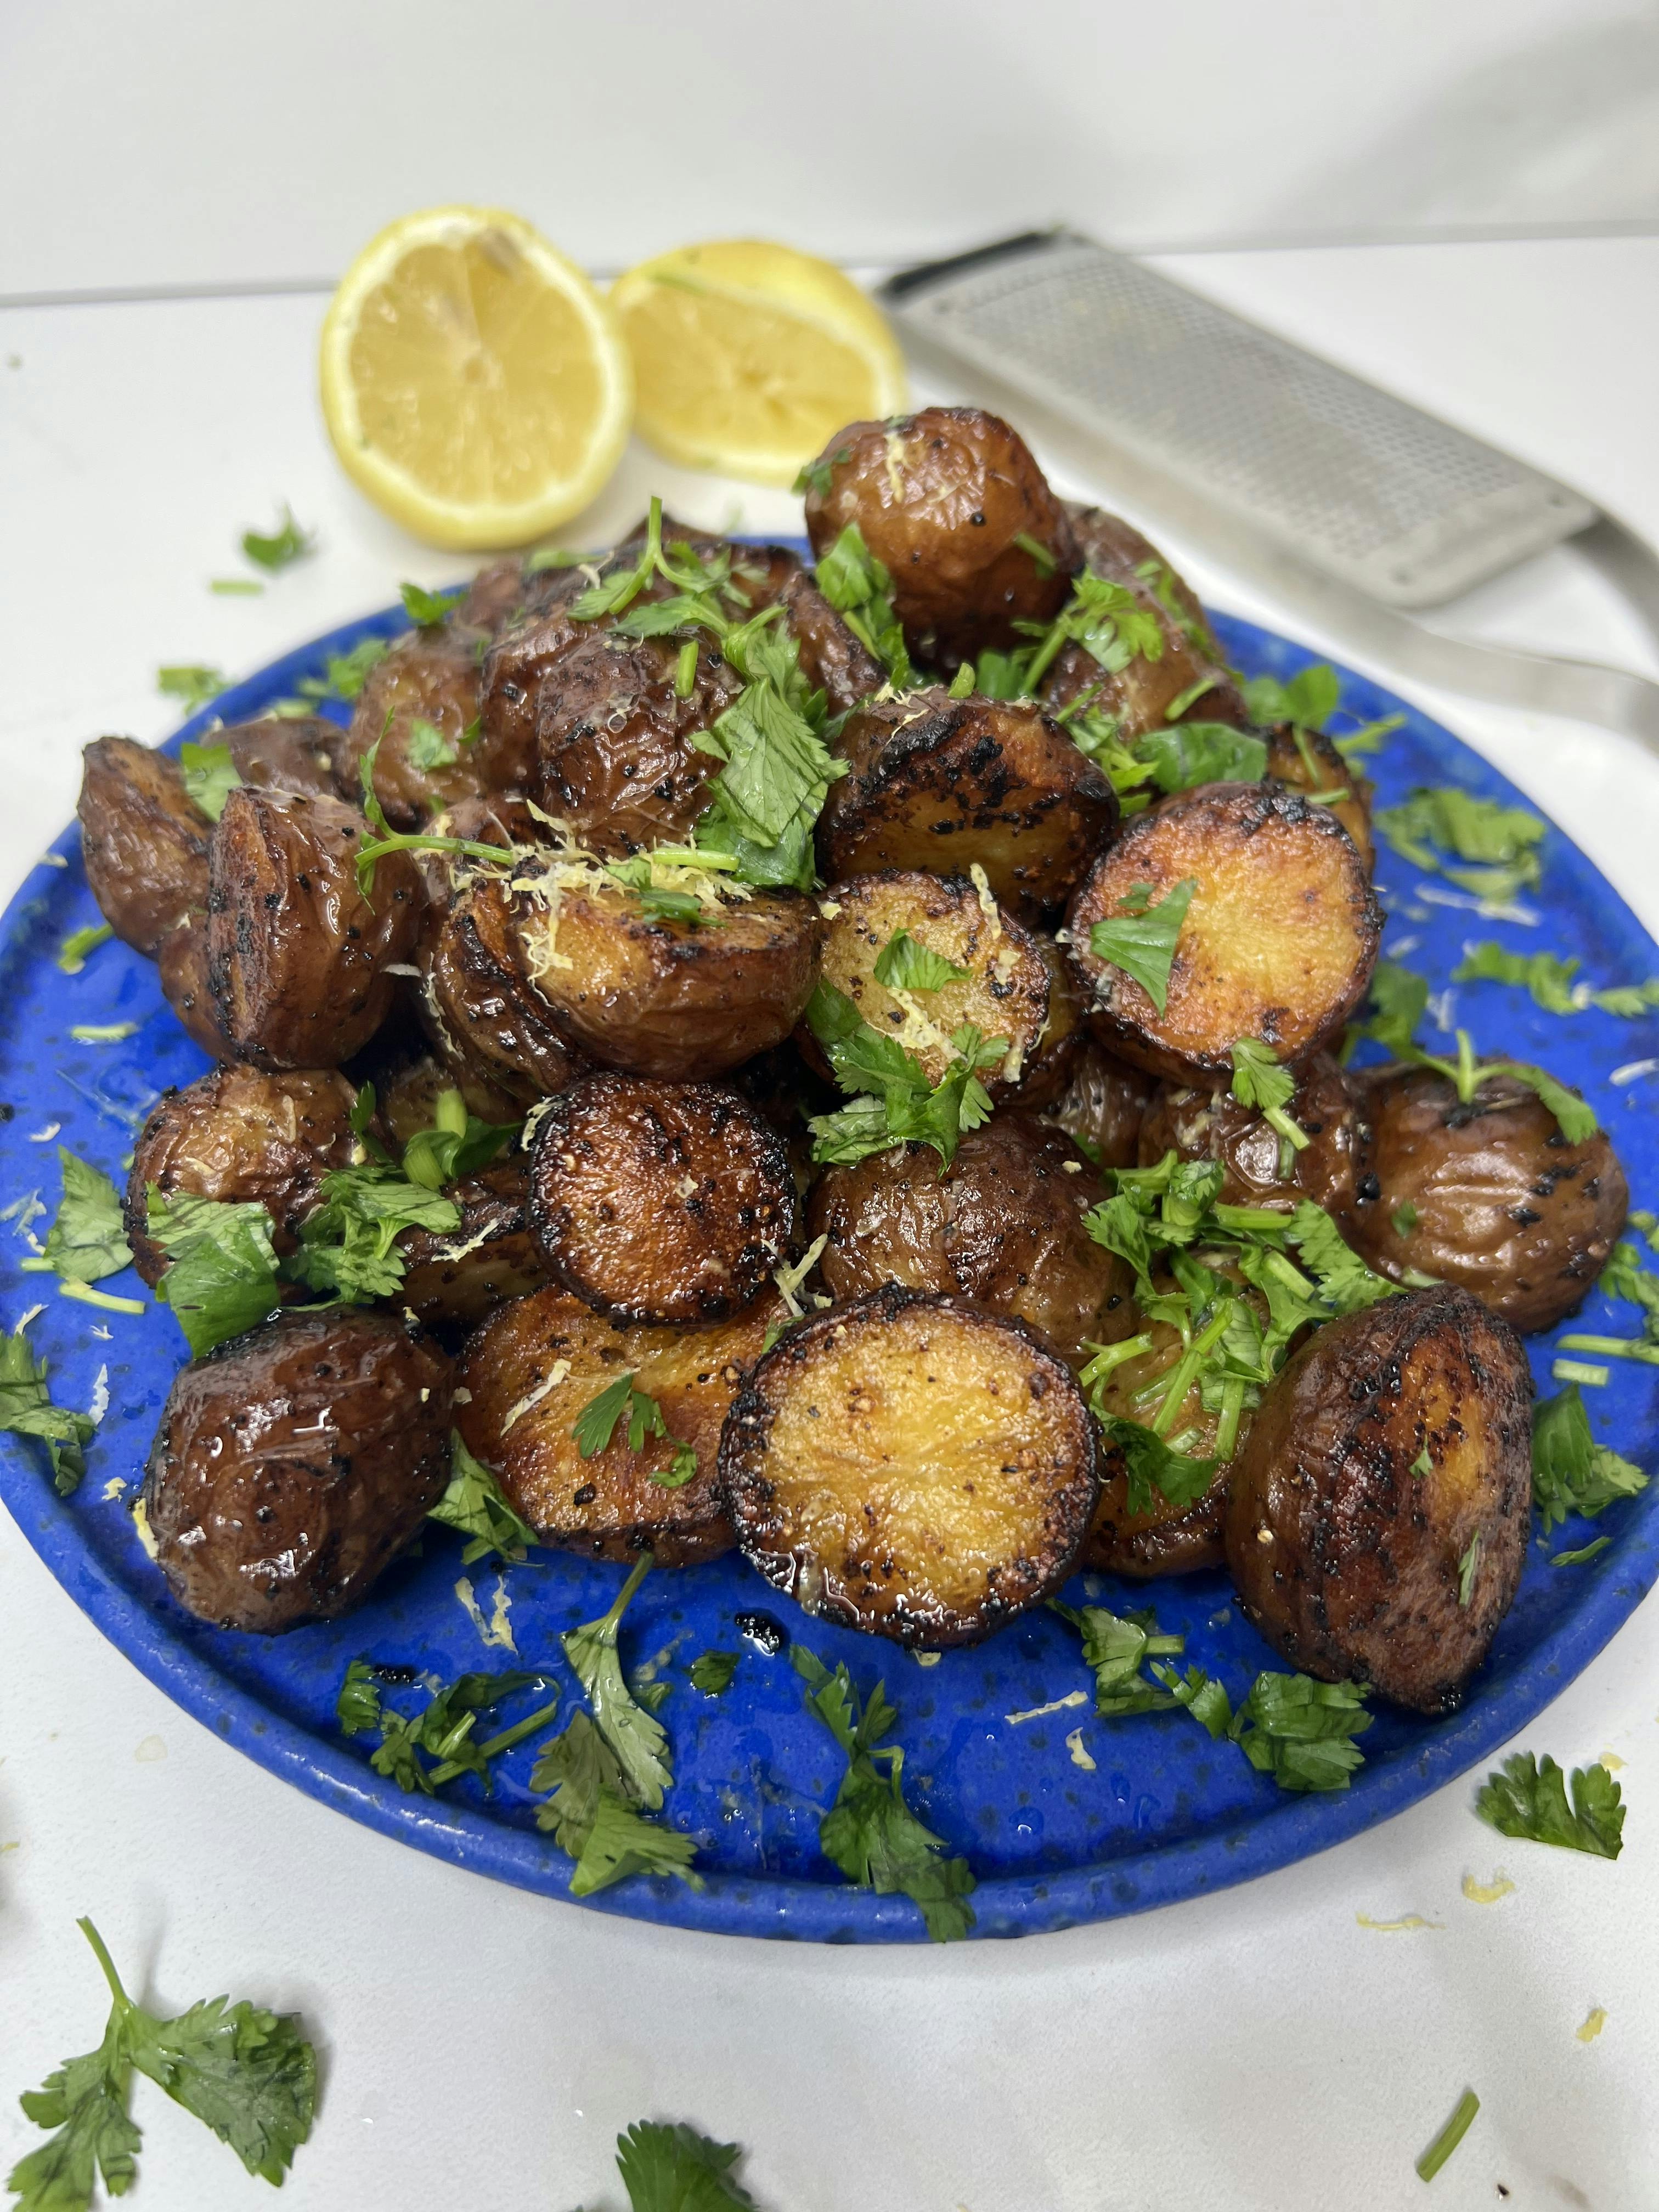 Picture for Lemon Roasted Potatoes